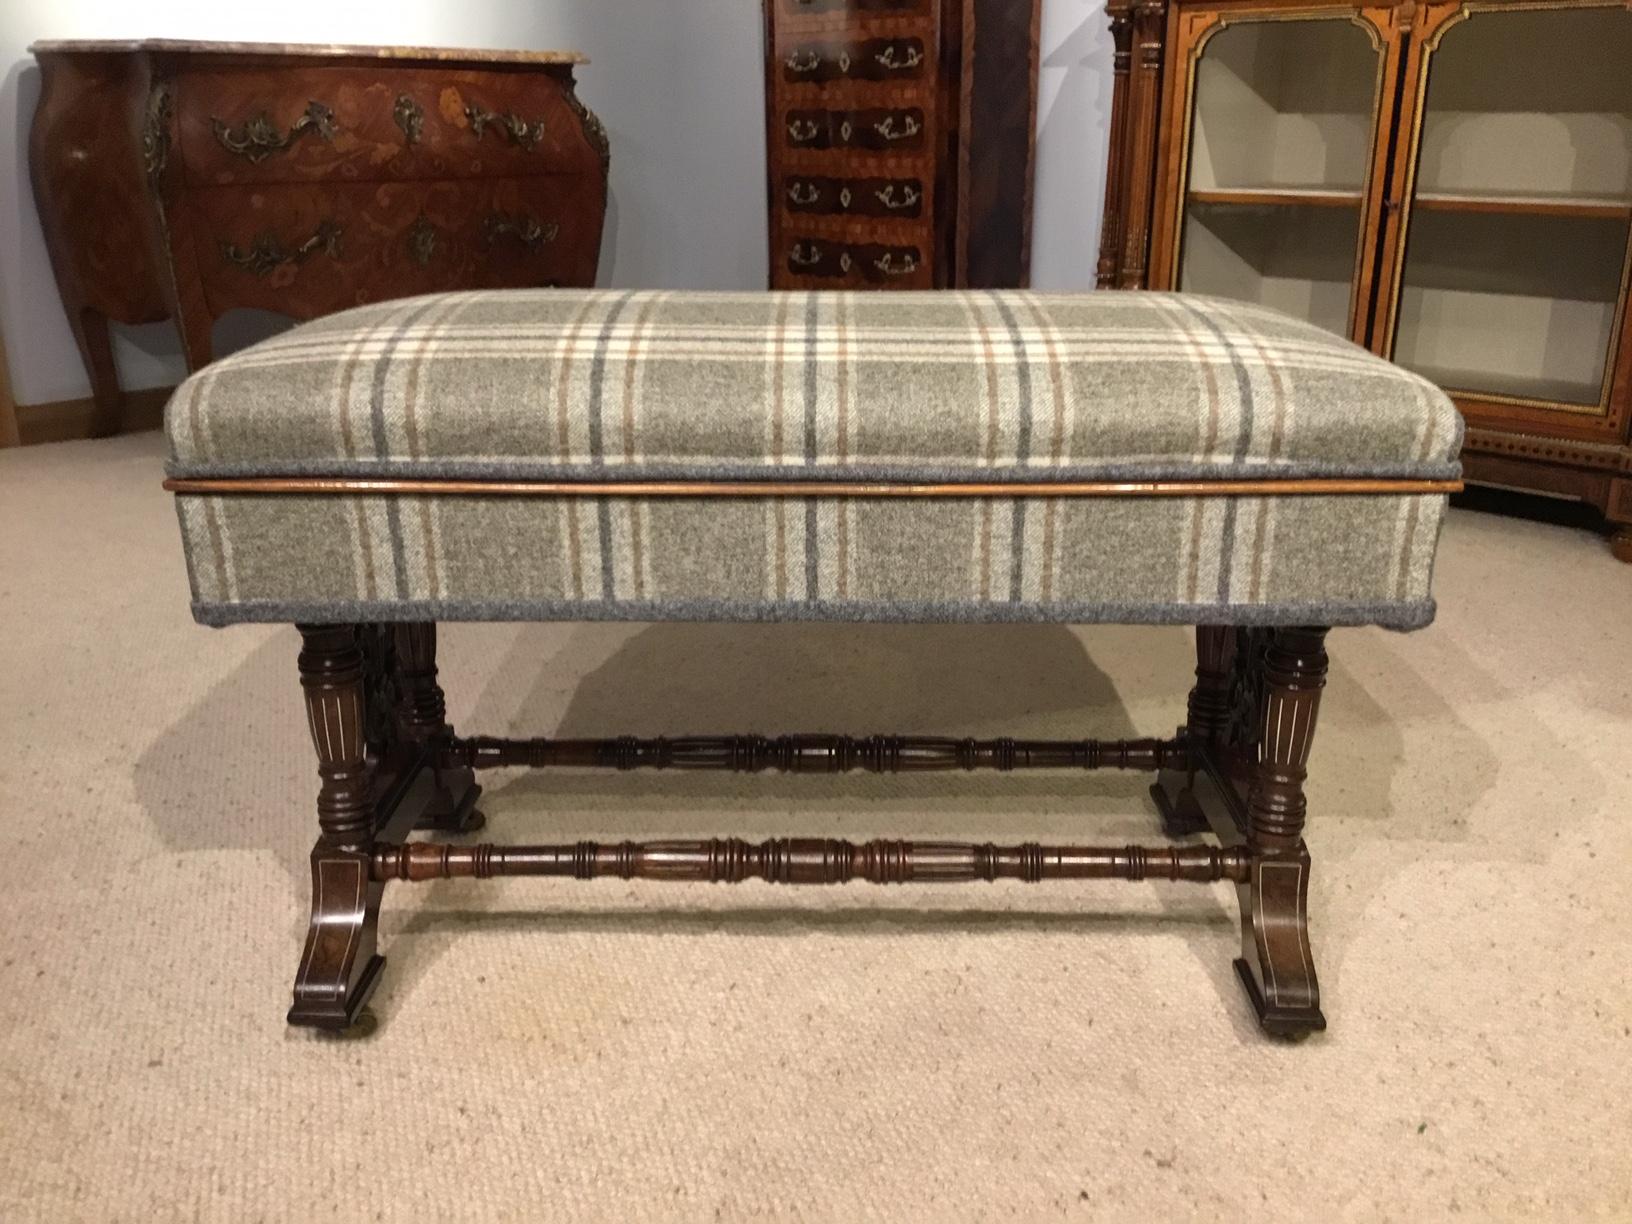 A mahogany inlaid Victorian period duet stool. A fine quality late Victorian duet stool upholstered in Abraham Moon wool and having a hinged seat revealing a mahogany lined storage area for sheet music, that can now be used for magazines etc.